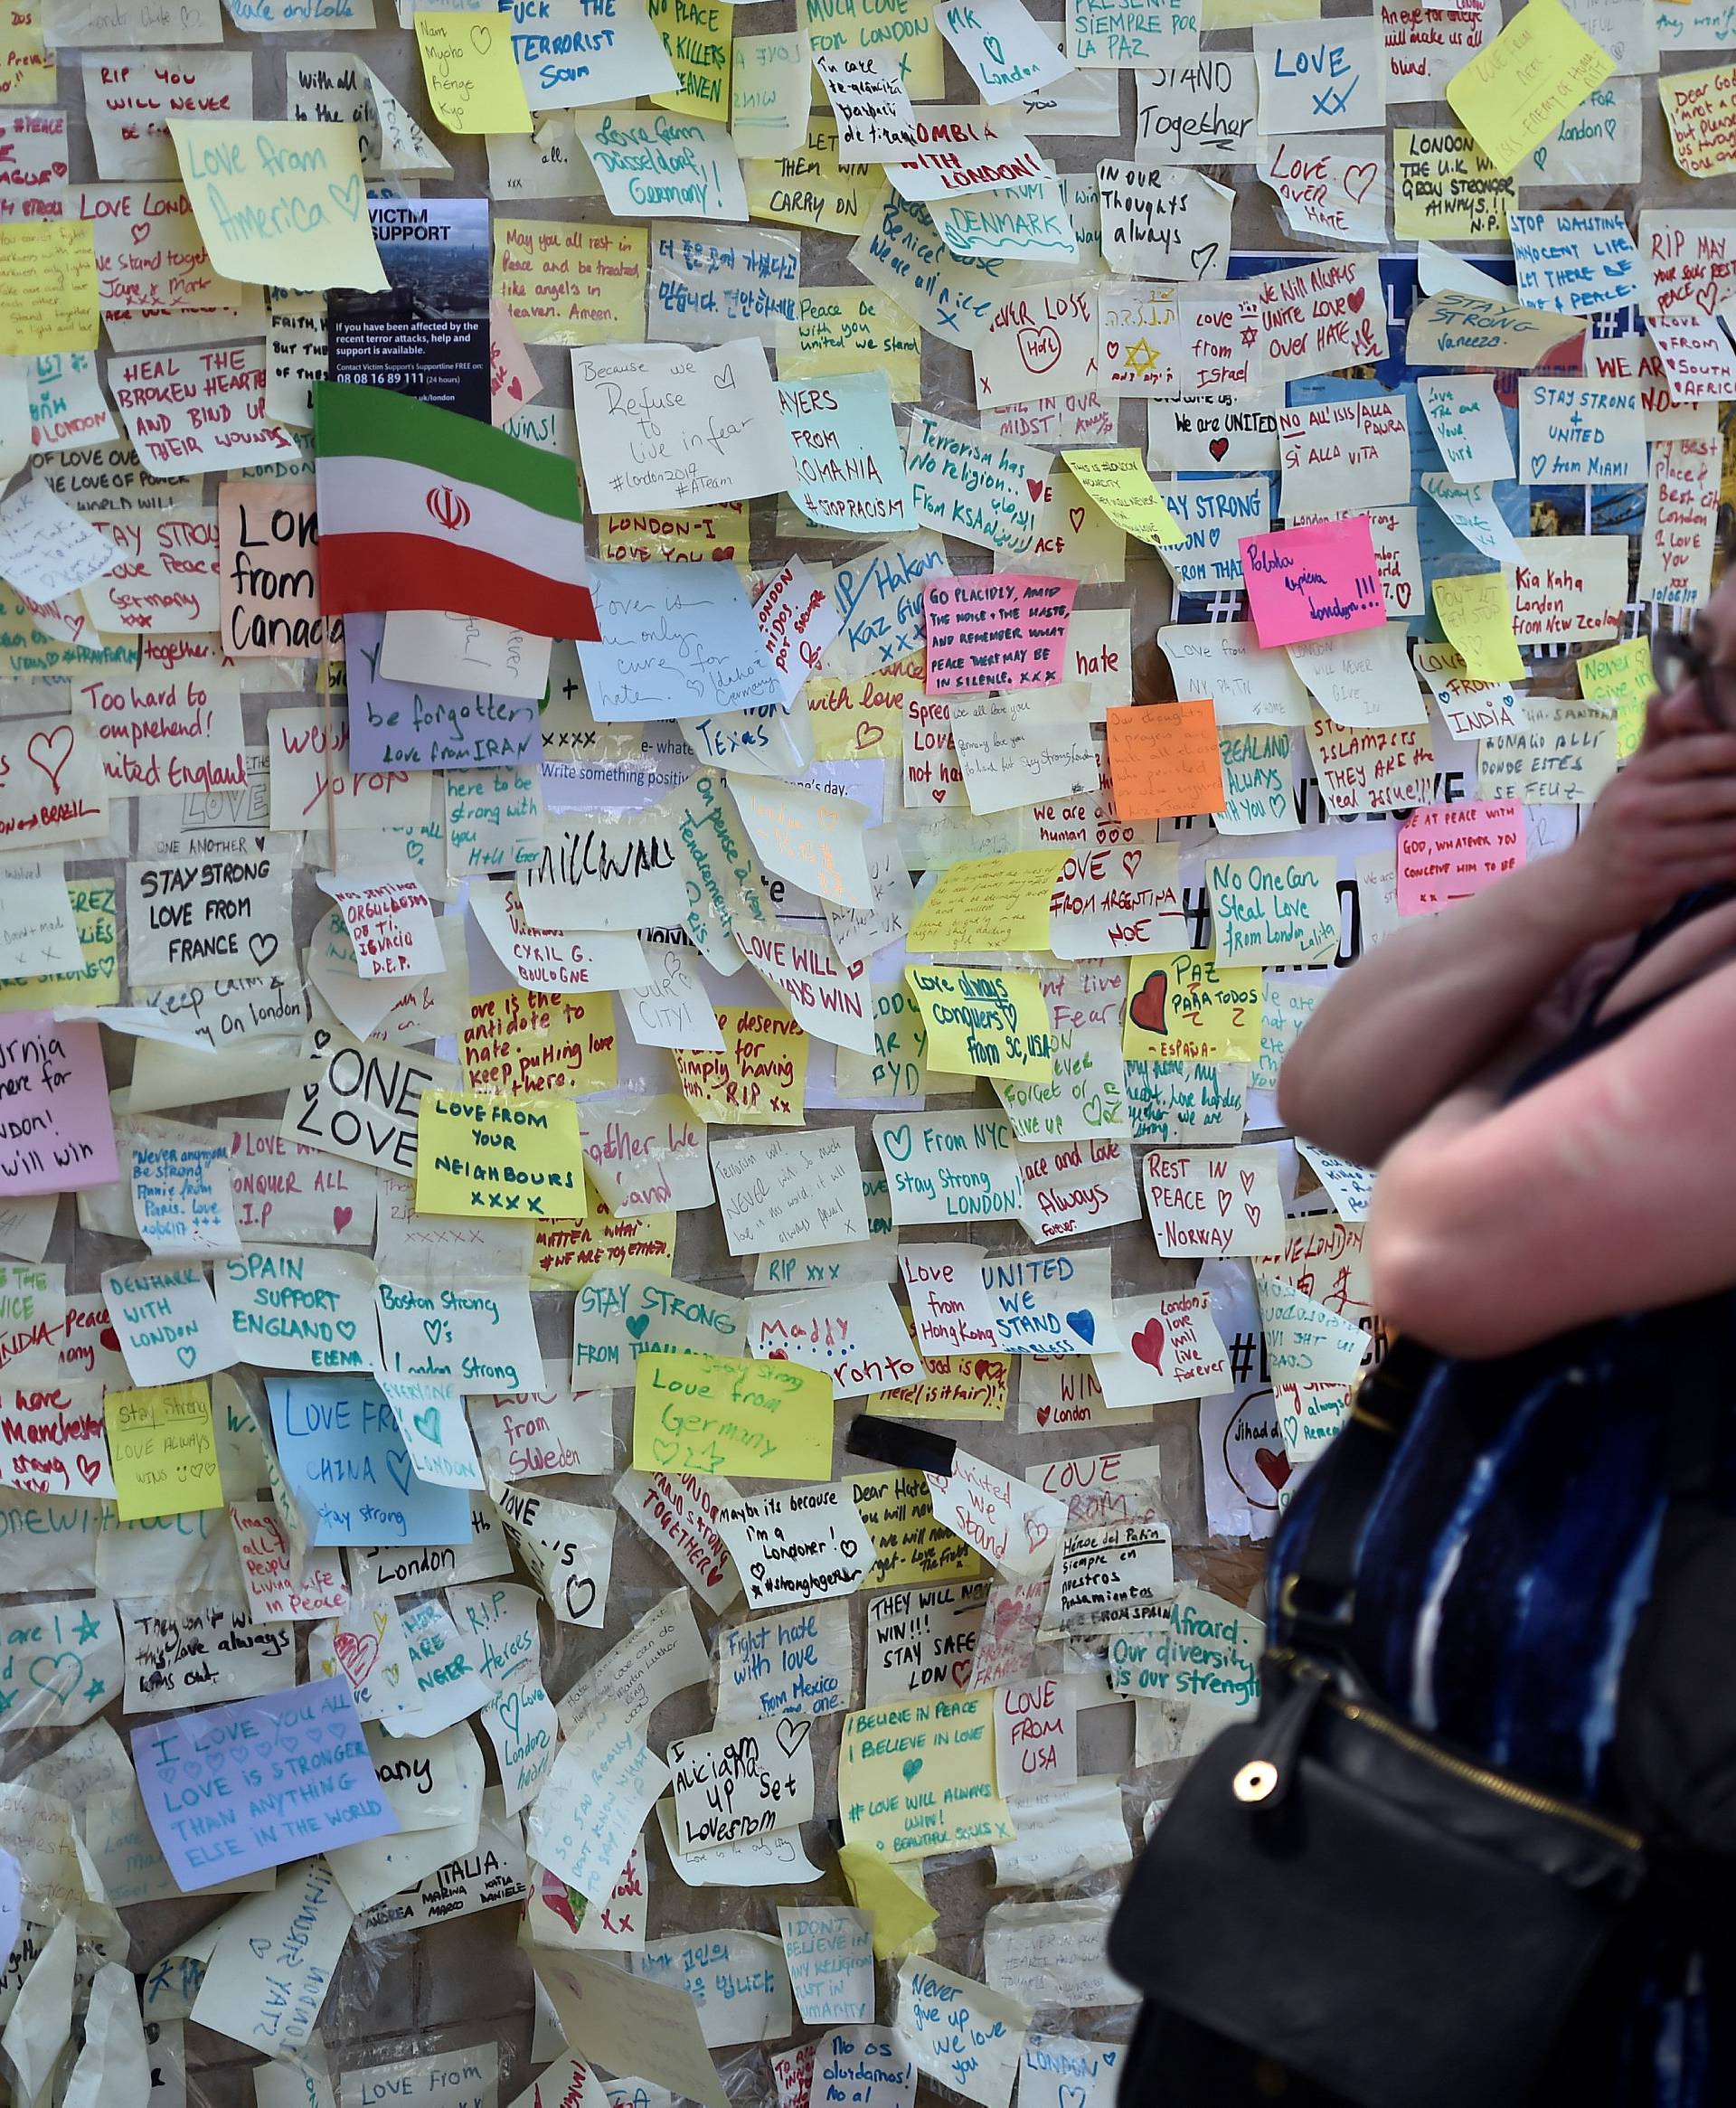 A woman reacts in front of a wall of messages in Borough Market, which officially re-opened today following the recent attack, in central London